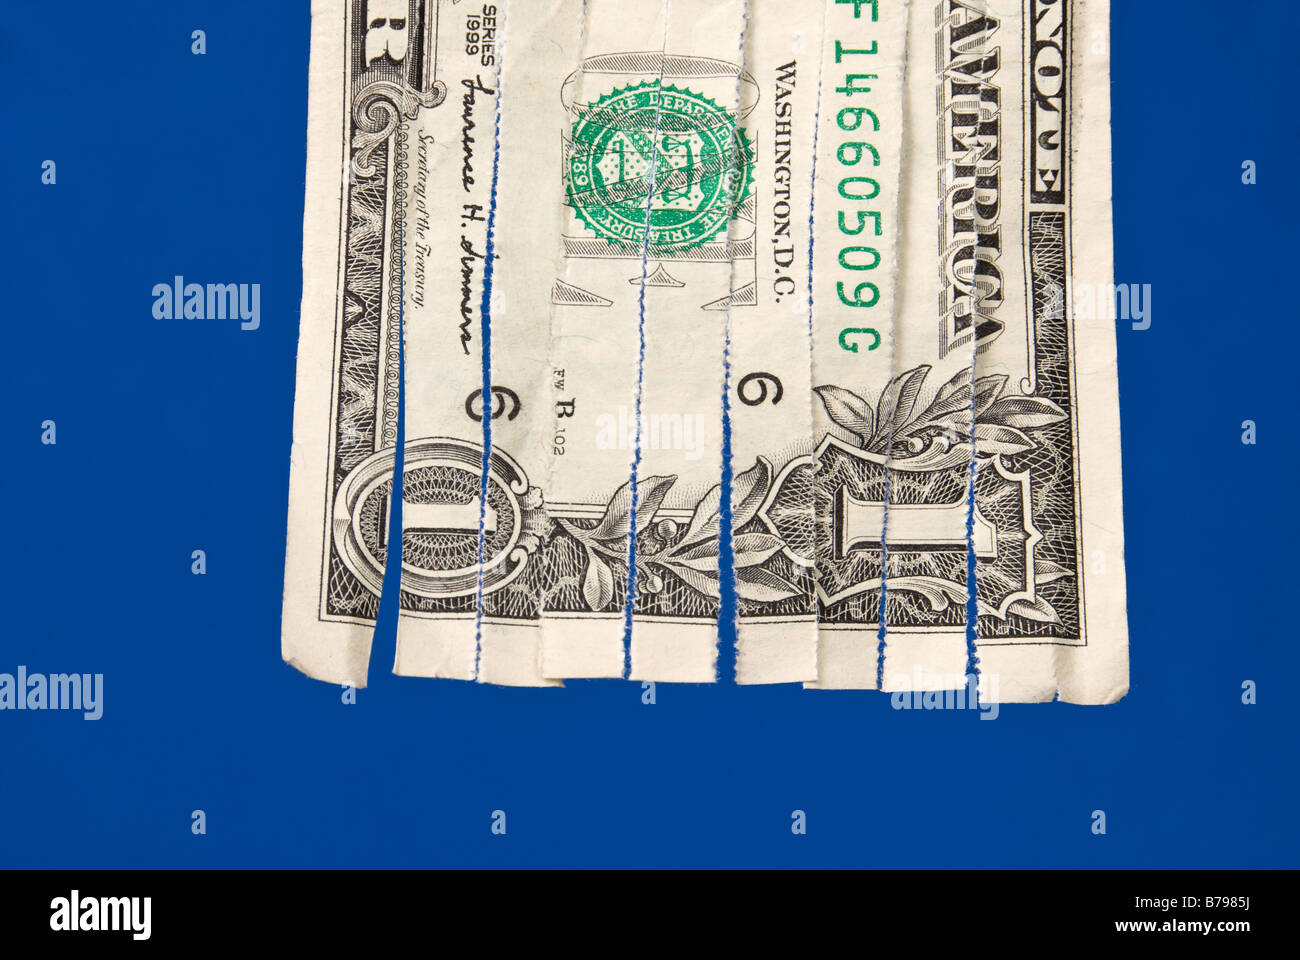 A shredded dollar bill isolated on blue The image can be used for economic financial inferences Stock Photo